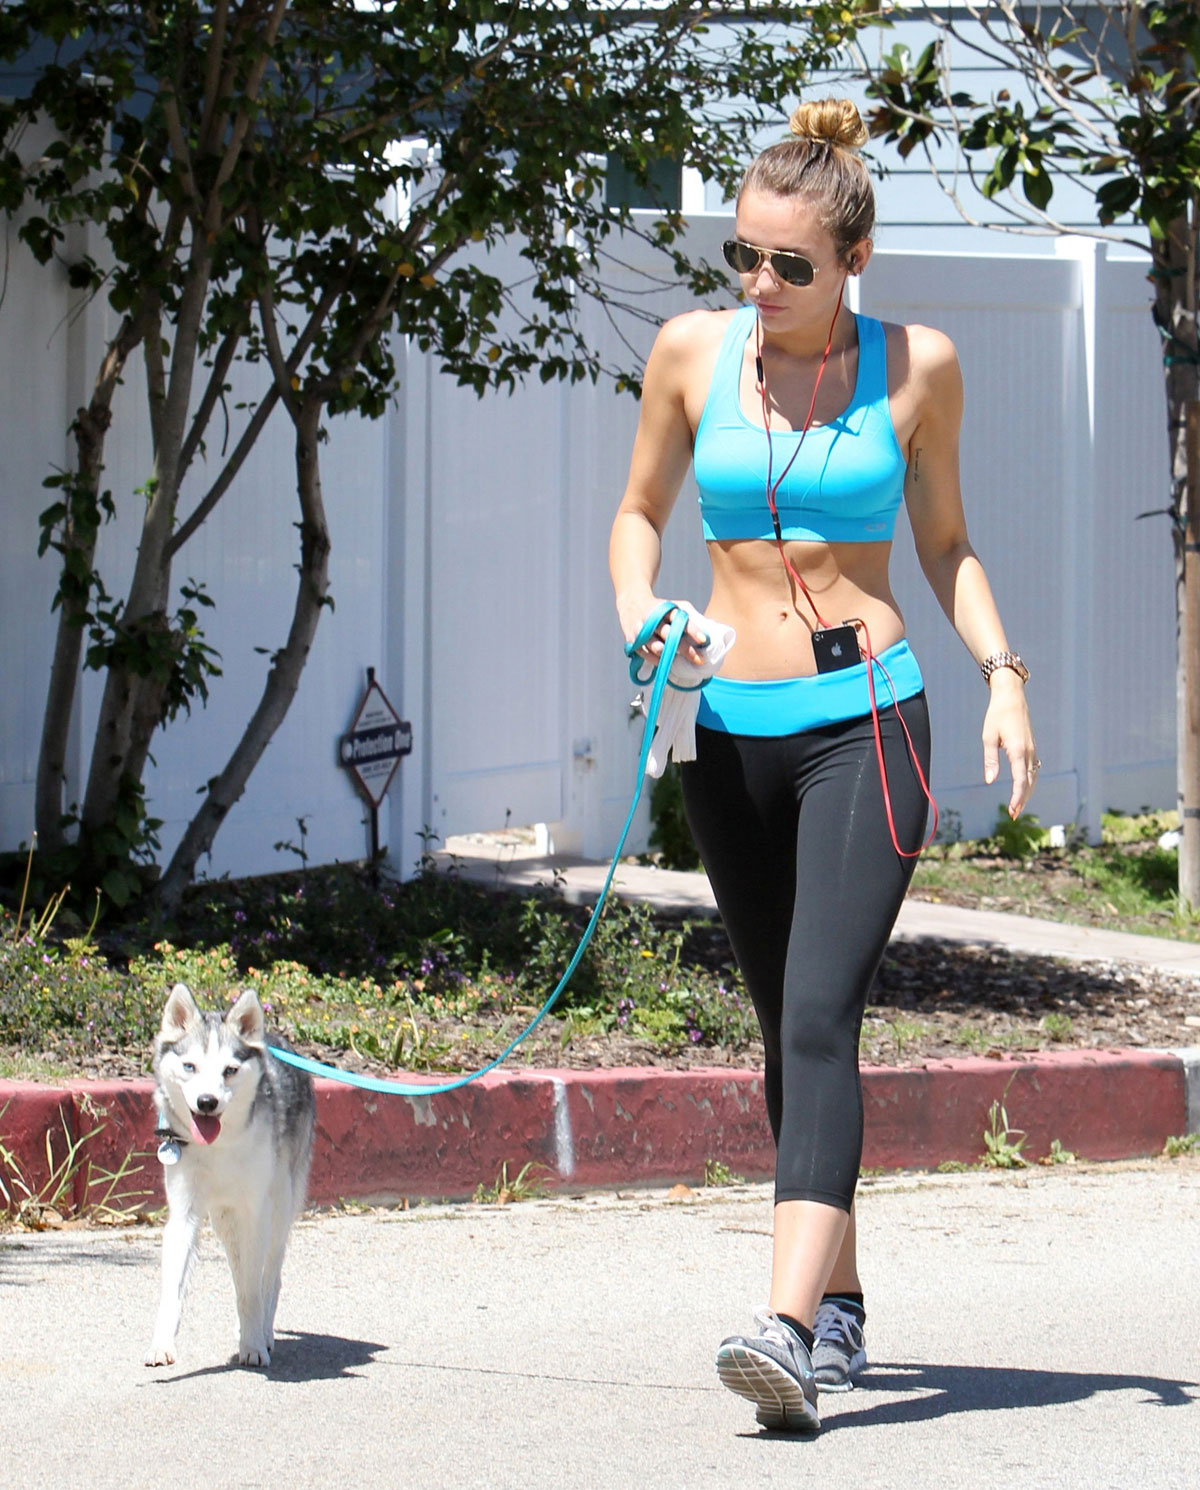 MILEY CYRUS in Tight Going for a Jog in Los Angeles – HawtCelebs